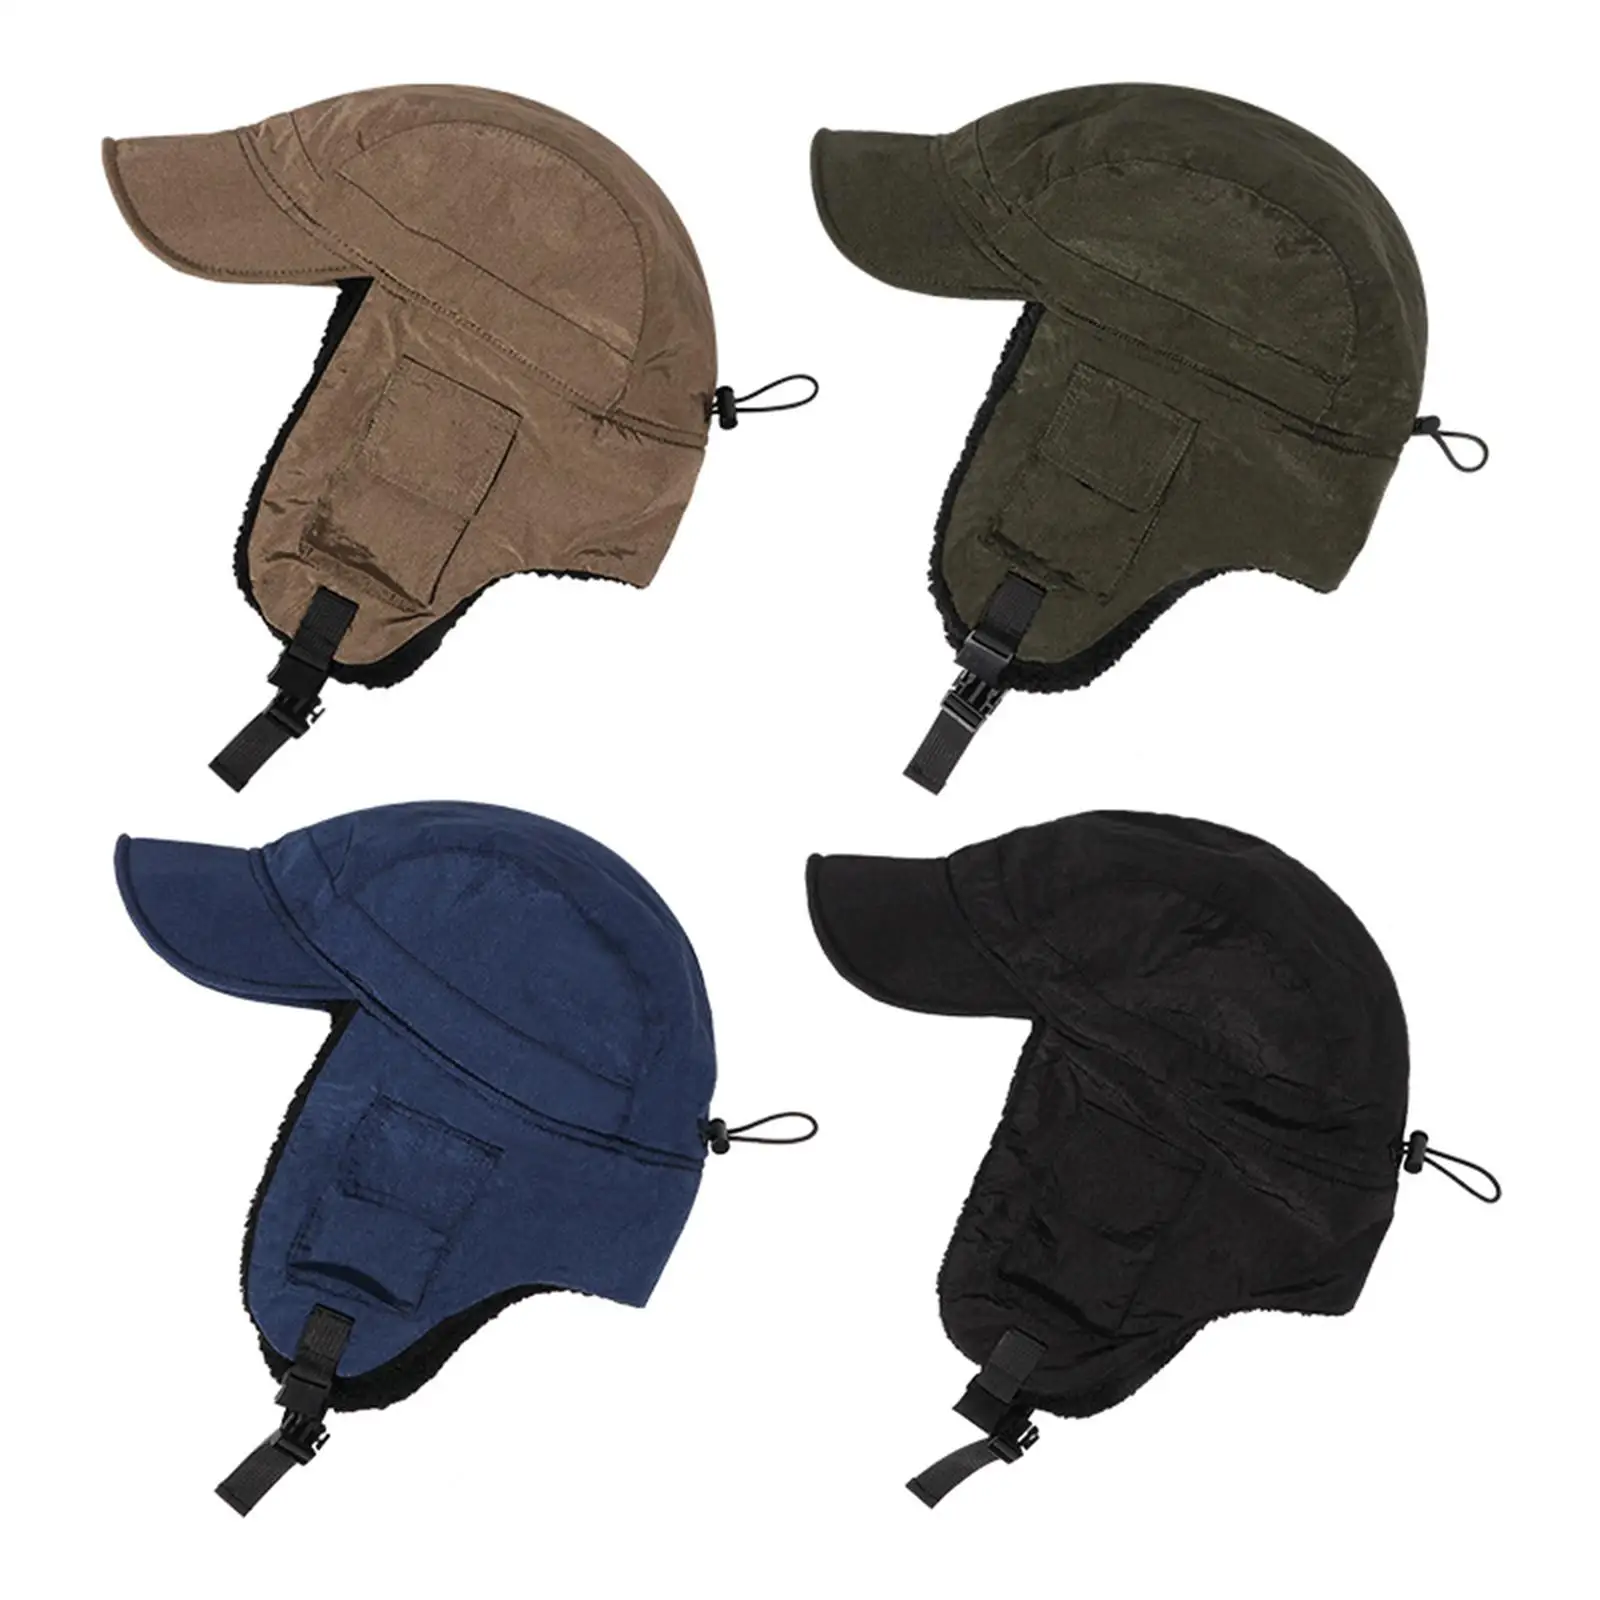 Winter Cap Men Women Windproof Baseball Hat with Ear Flaps for Climbing Hunting Motorcycle